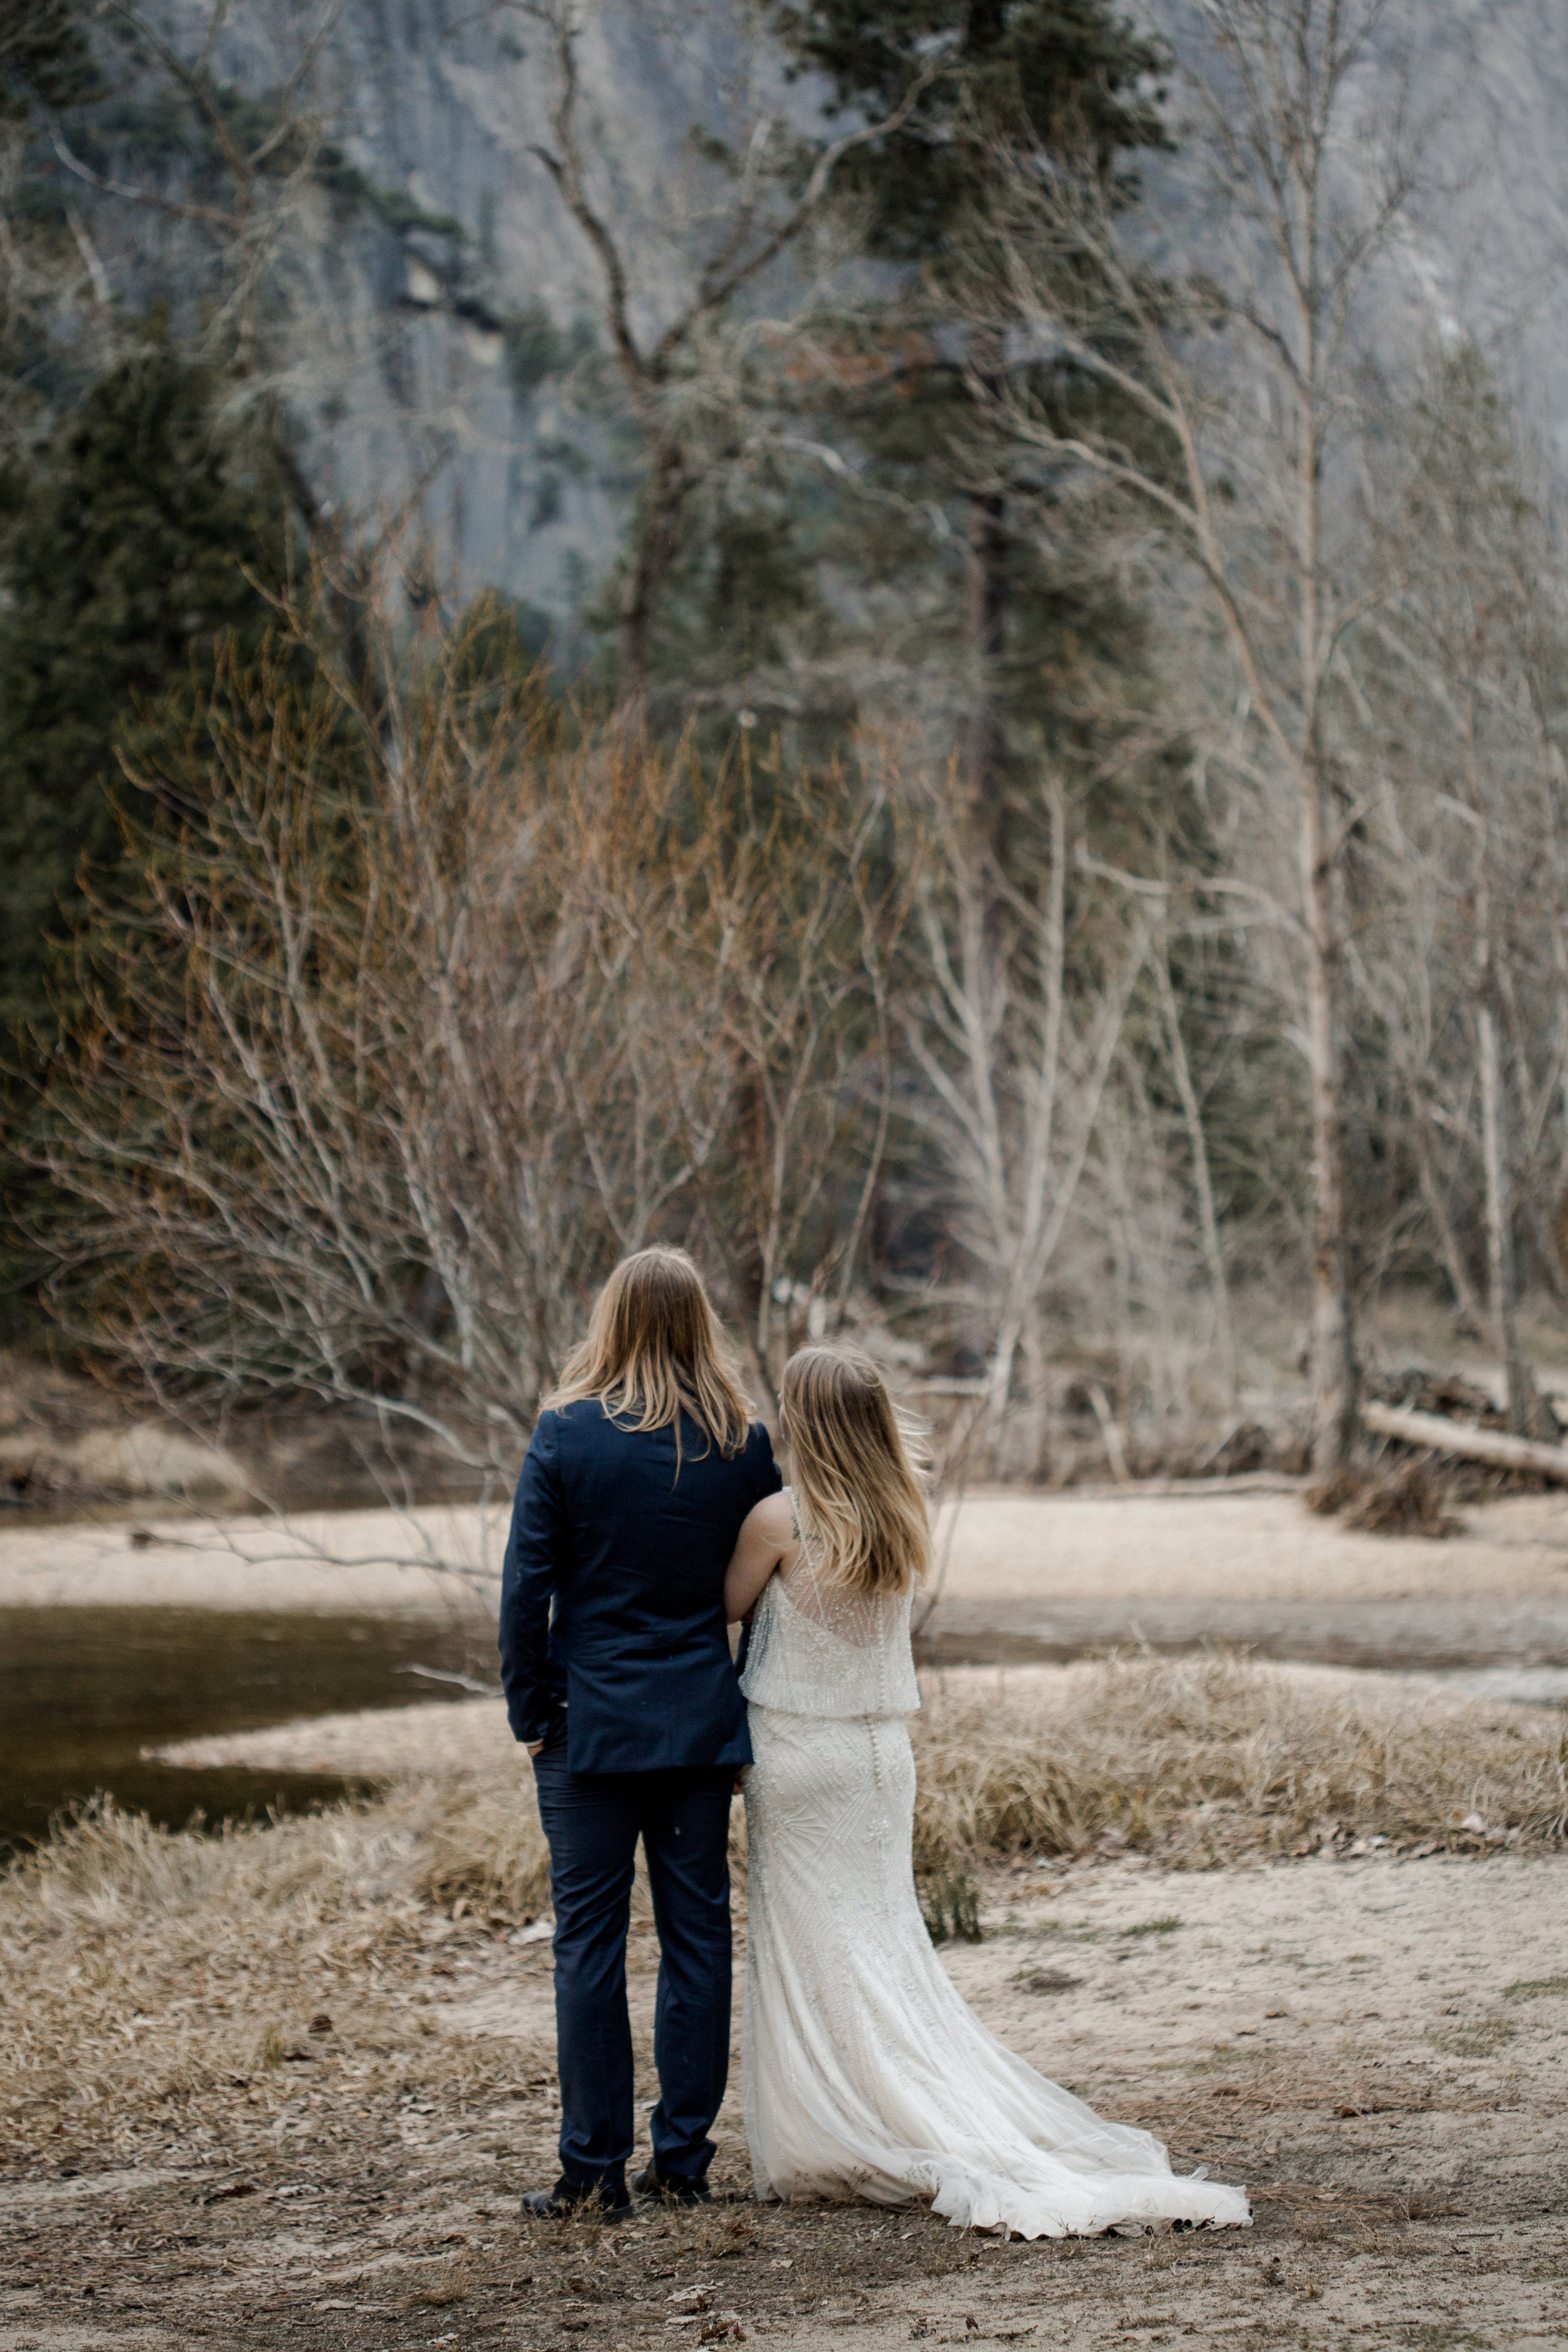 nicole-daacke-photography-yousemite-national-park-elopement-photographer-winter-cloud-moody-elope-inspiration-yosemite-valley-tunnel-view-winter-cloud-fog-weather-wedding-photos-30.jpg